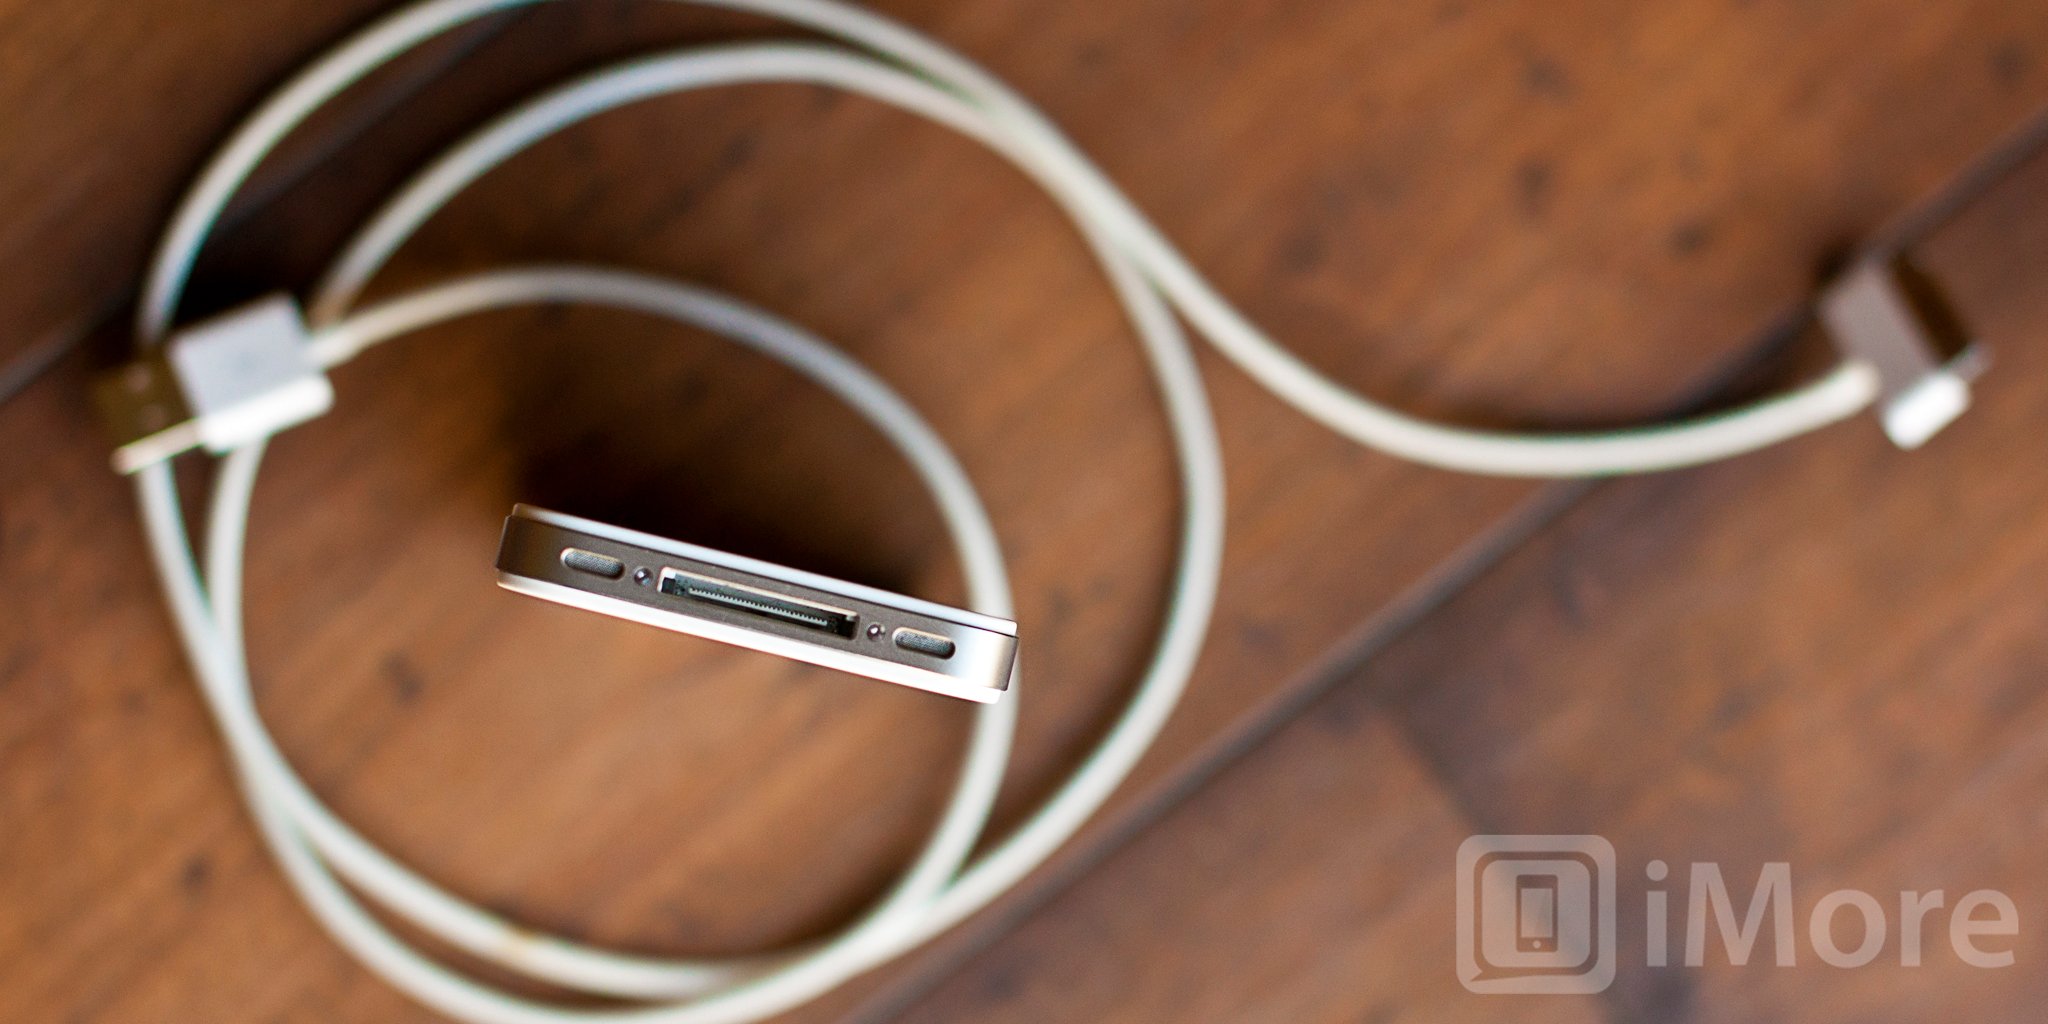 Apple's standard wall charger is a lot more advanced than you may think